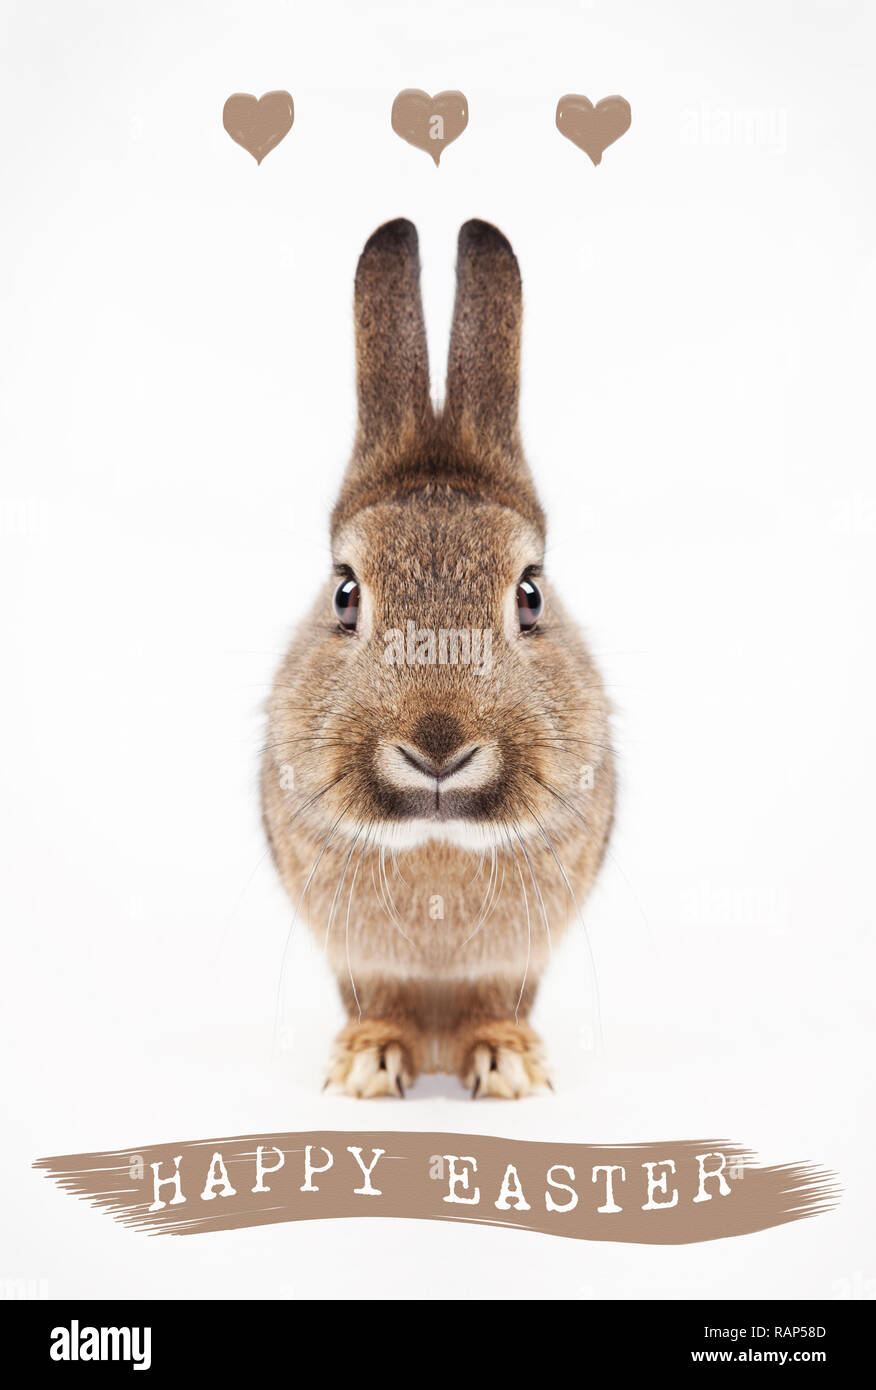 a hare isolated with text happy easter, background white Stock Photo